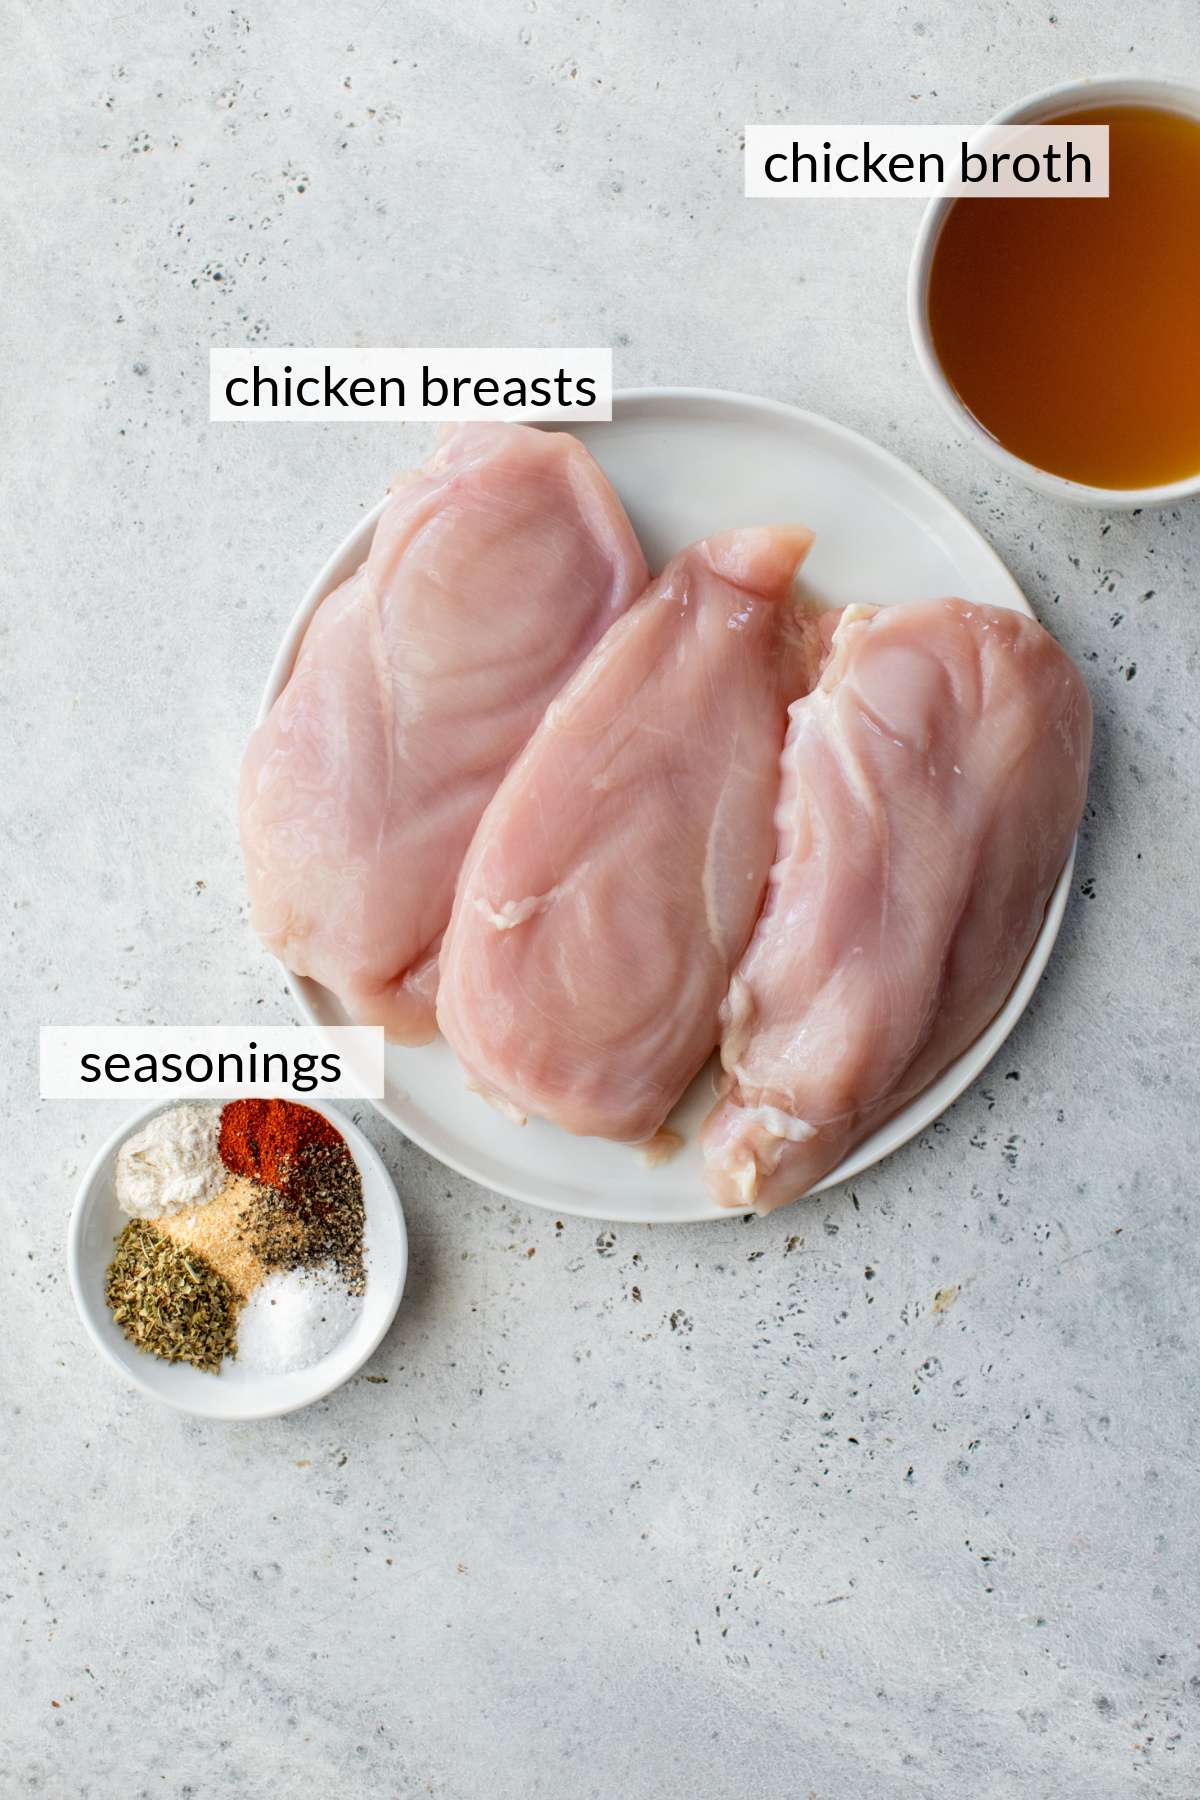 Raw chicken breasts near a bowl of broth and a small plate of spices.